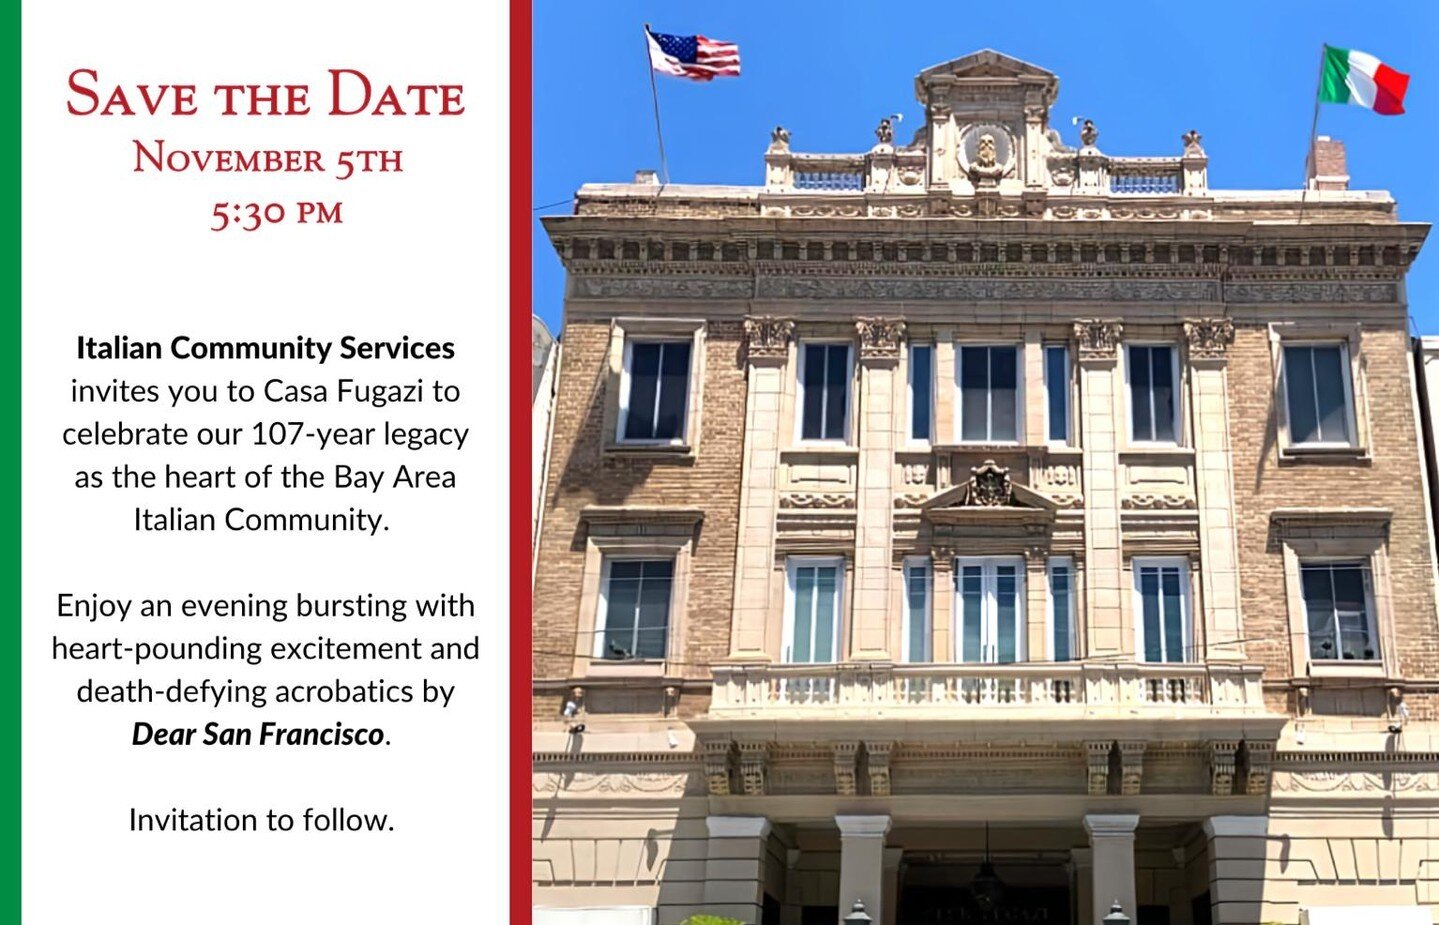 📣 Save the Date: November 5th, 5:30 PM! 

Join Italian Community Services at Casa Fugazi to celebrate our 107-year legacy as the heart of the Bay Area Italian community. 

Prepare for an evening filled with thrilling acrobatics by Dear San Francisco